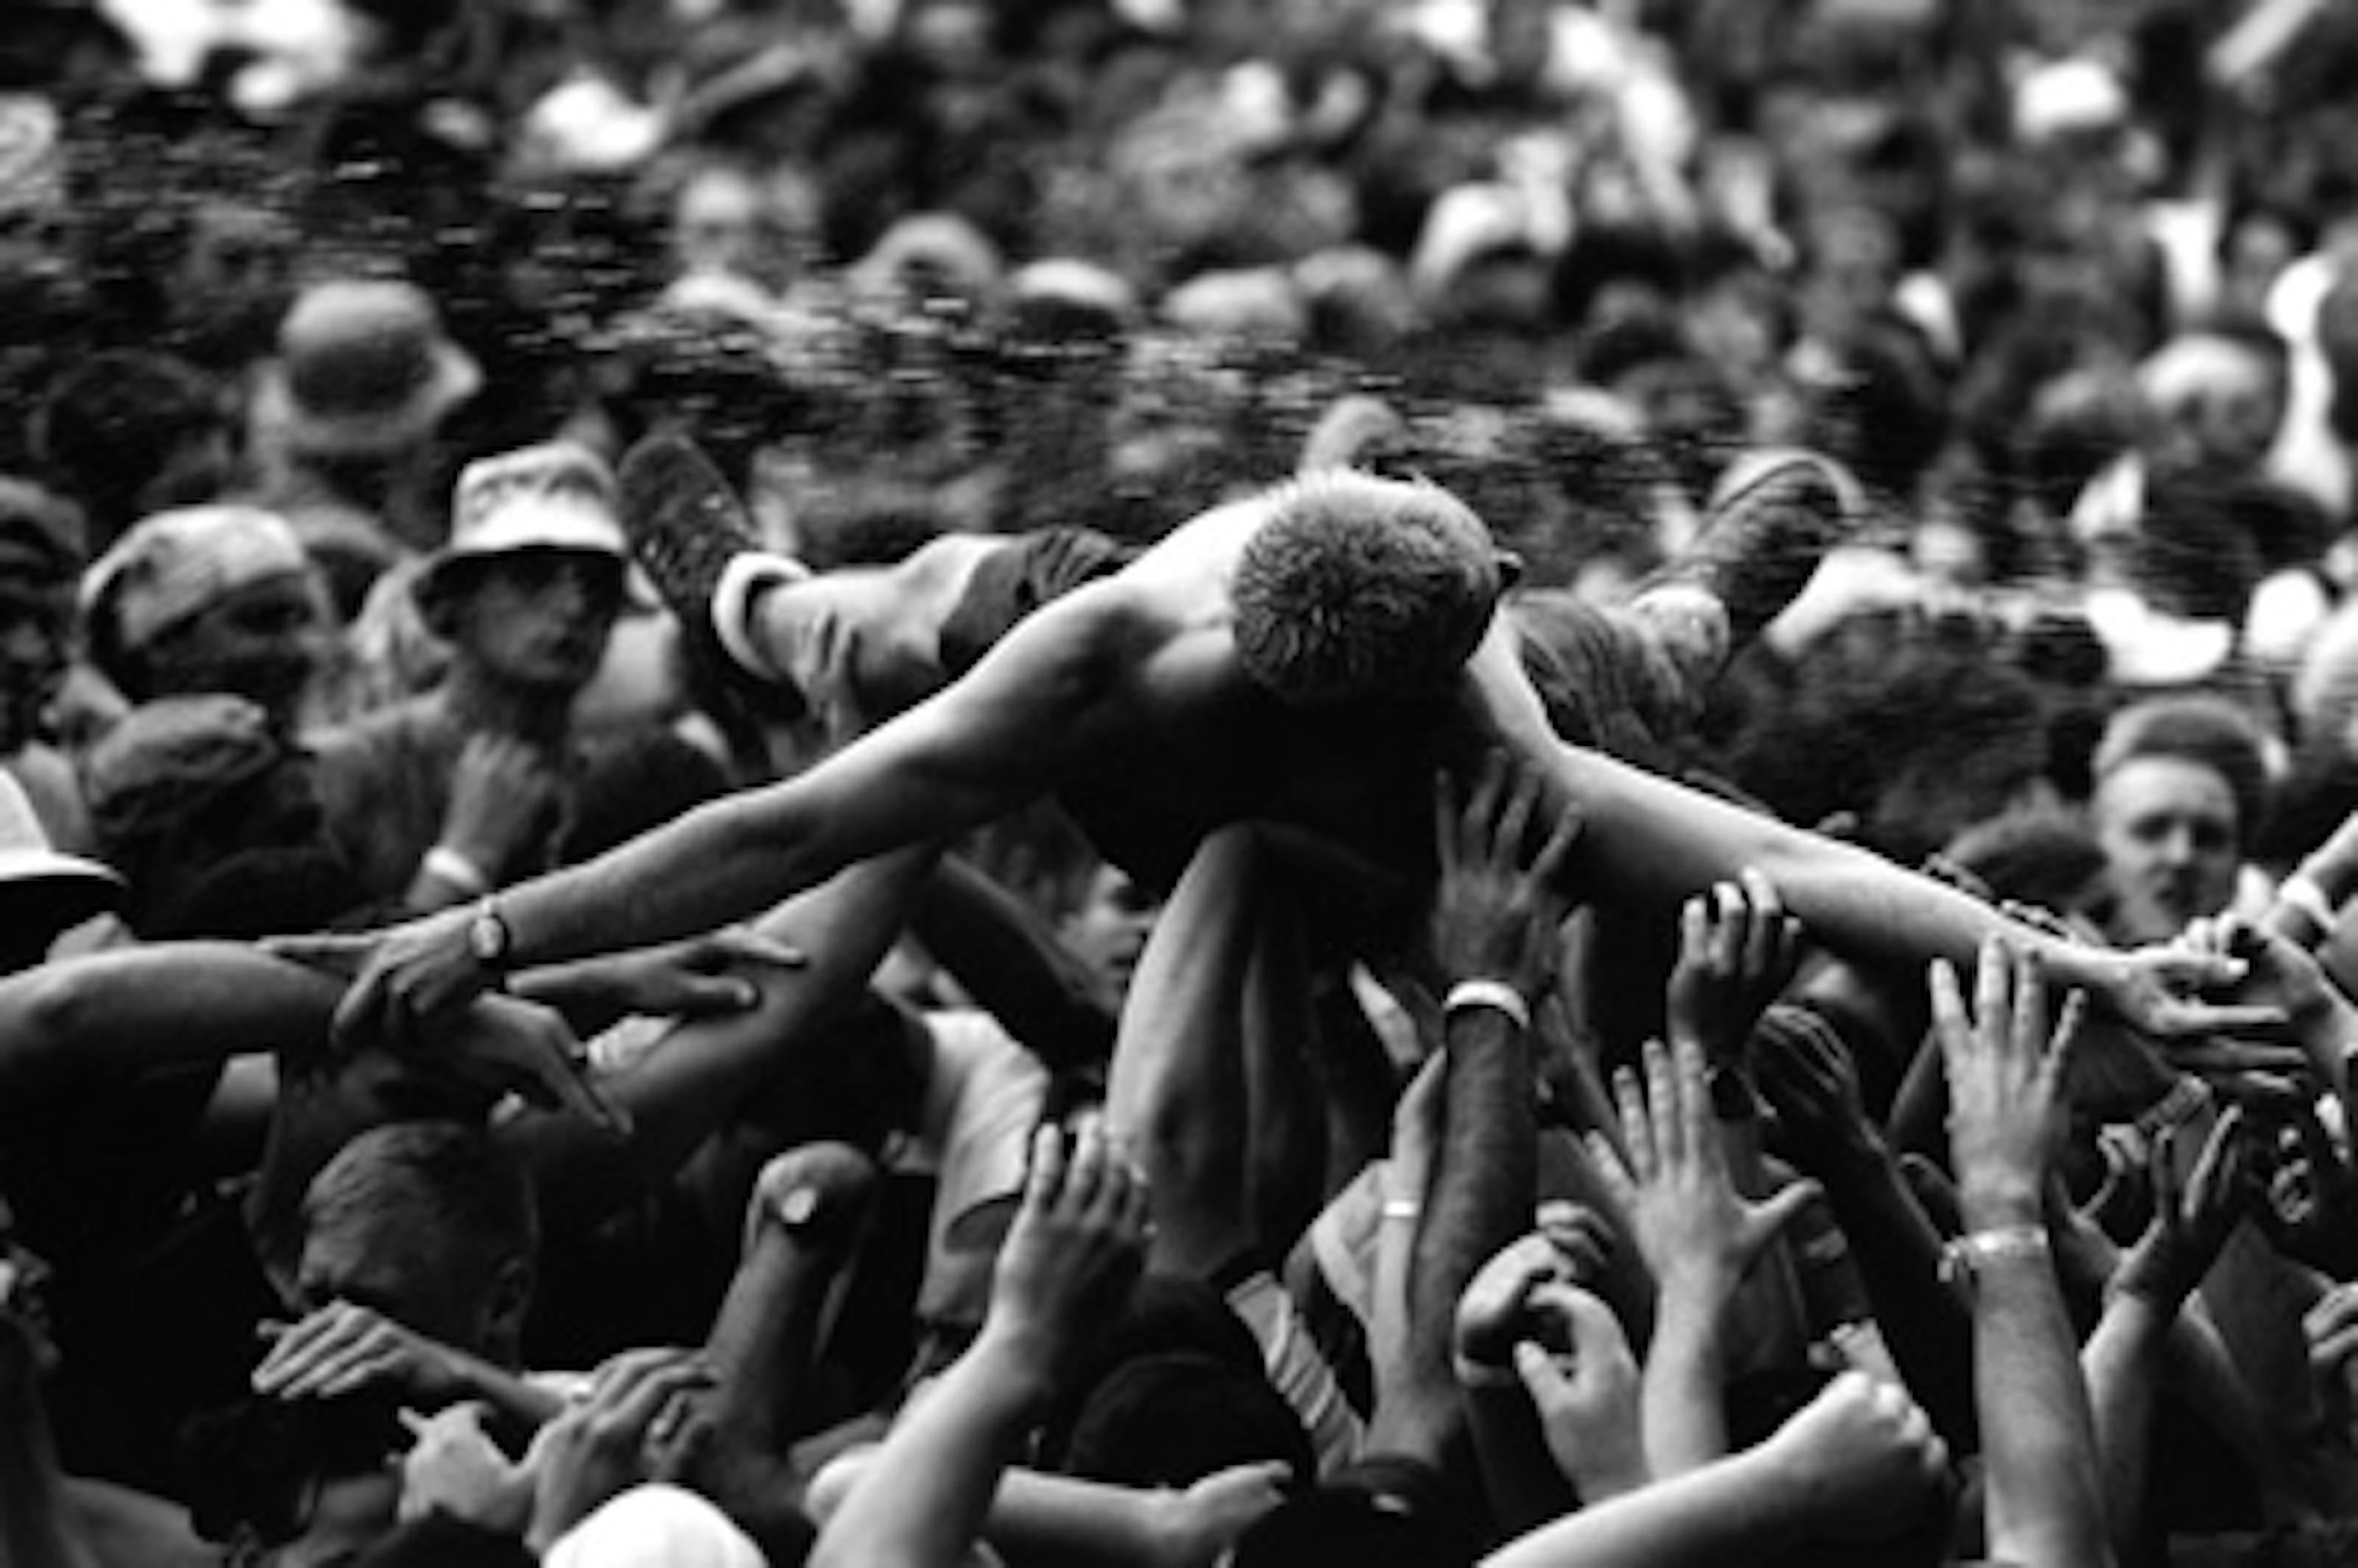 Mike Schreiber Black and White Photograph – Woodstock 99